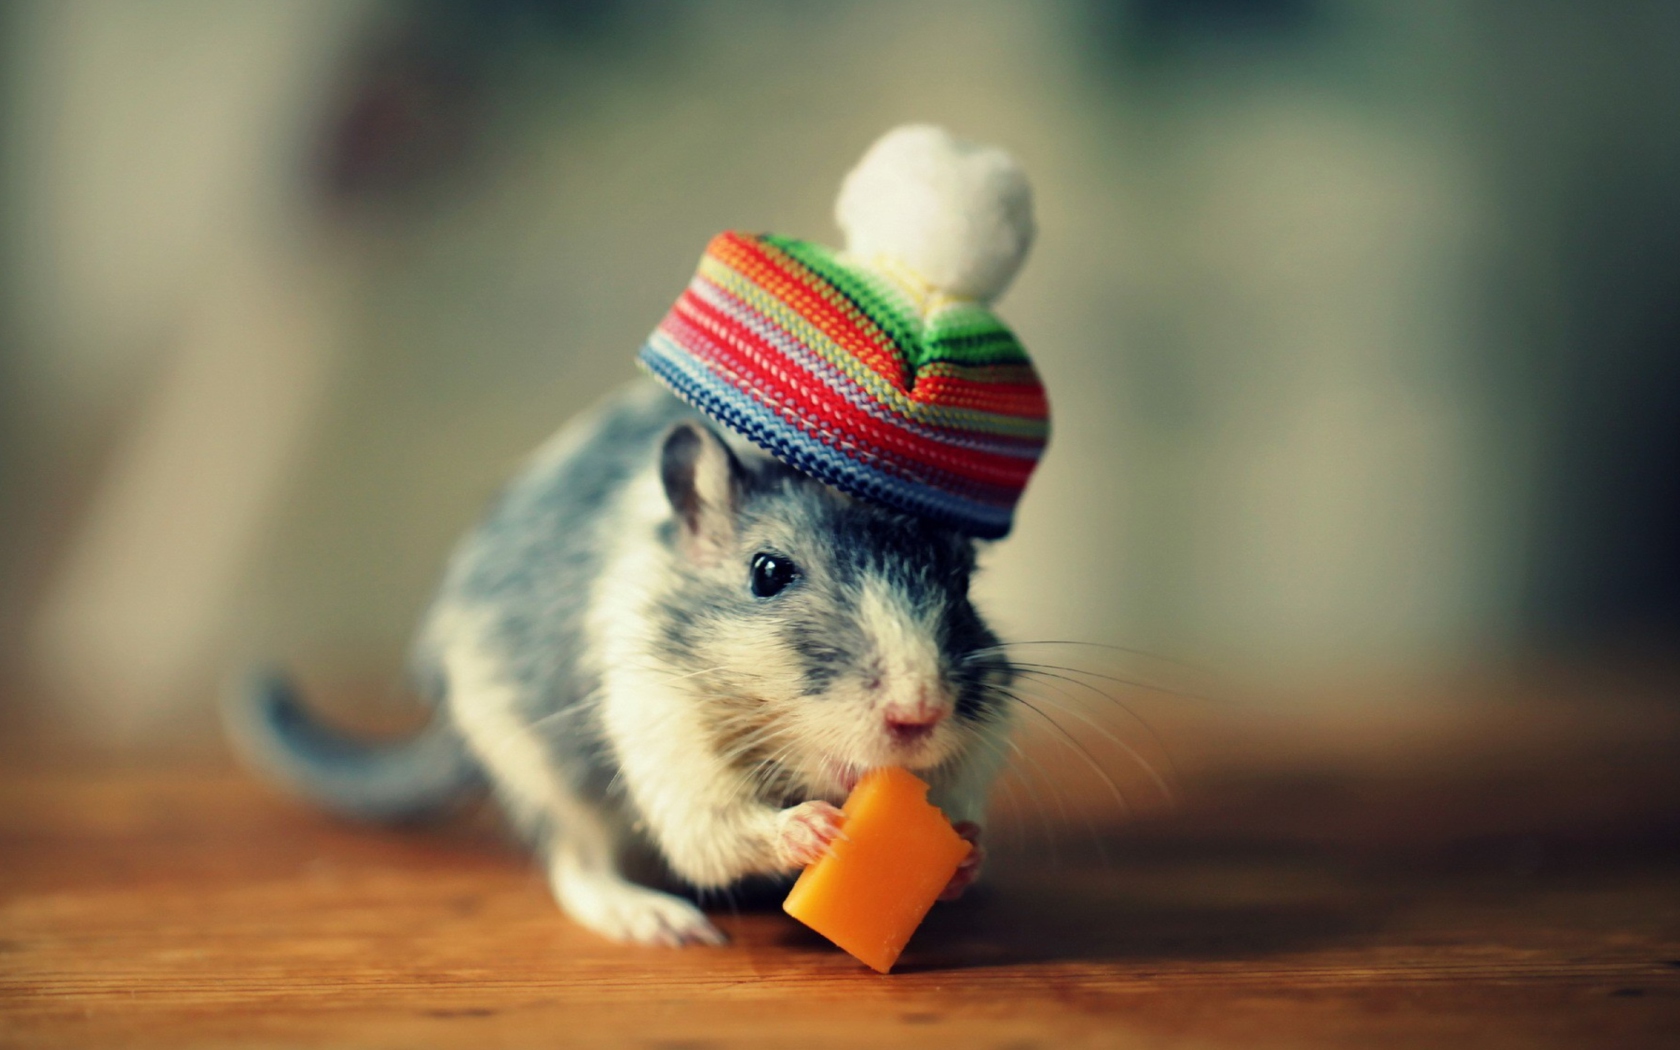 Mouse In Funny Little Hat Eating Cheese wallpaper 1680x1050